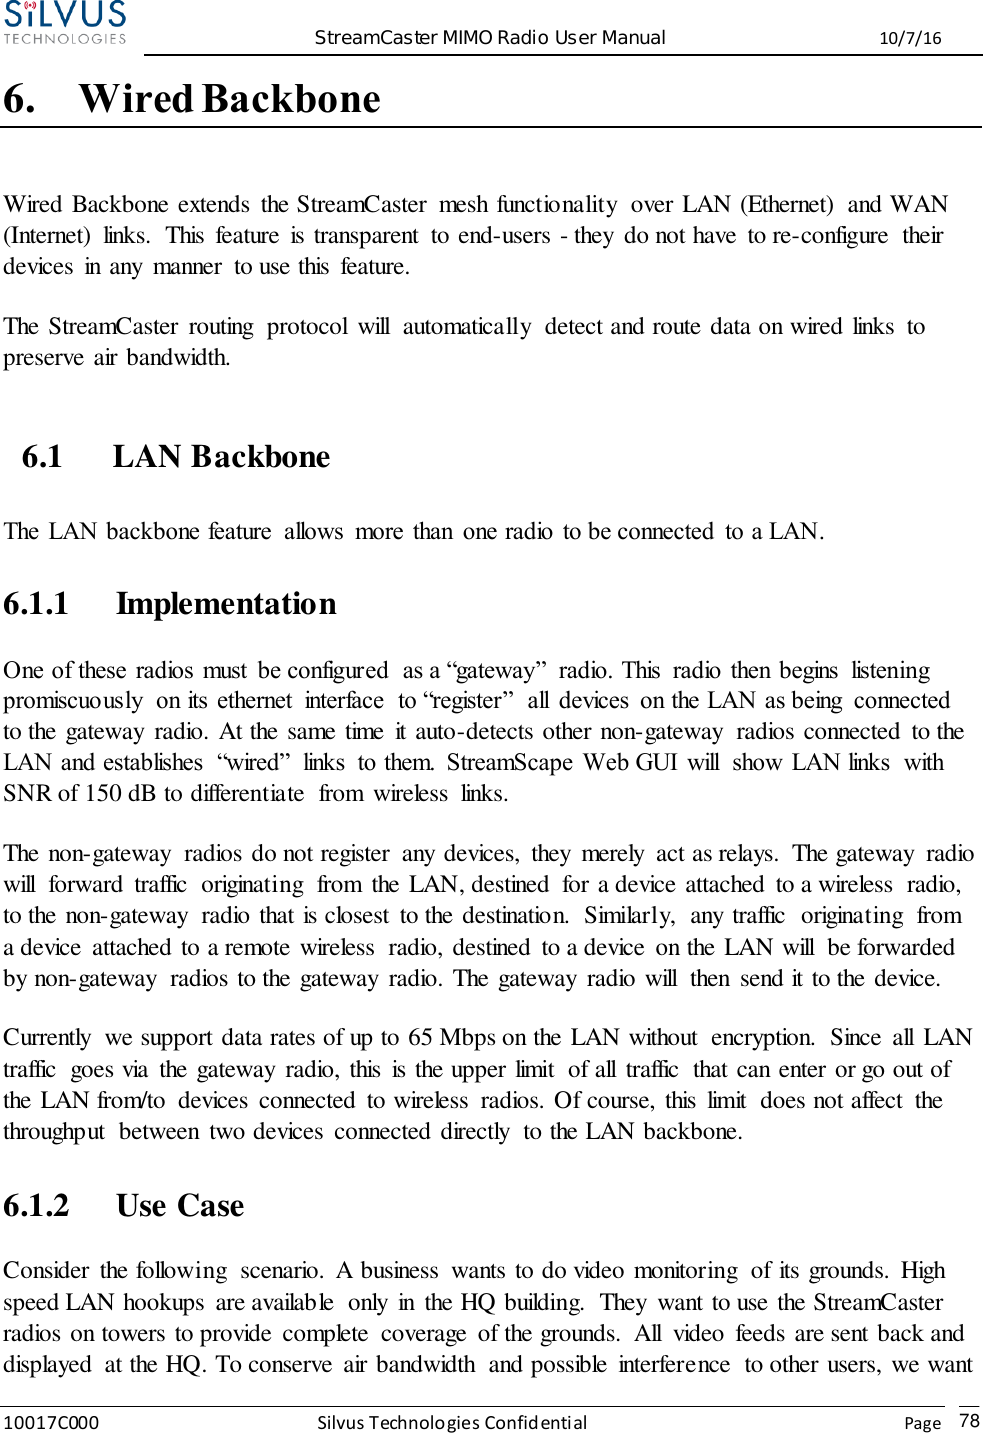  StreamCaster MIMO Radio User Manual  10/7/16 10017C000 Silvus Technologies Confidential    Page   78 6. Wired Backbone Wired Backbone extends  the StreamCaster  mesh functionality  over LAN (Ethernet)  and WAN (Internet)  links.  This  feature  is transparent  to end-users - they  do not have  to re-configure  their devices  in any  manner  to use this  feature. The StreamCaster  routing  protocol  will  automatically  detect and route data on wired links  to preserve air bandwidth. 6.1 LAN Backbone The  LAN backbone feature  allows  more than  one radio  to be connected  to a LAN. 6.1.1 Implementation One of these  radios must  be configured  as a “gateway”  radio. This  radio  then  begins  listening promiscuously  on its  ethernet  interface  to “register”  all  devices  on the LAN as being  connected to the gateway  radio. At the same time  it auto-detects other non-gateway  radios connected  to the LAN and establishes  “wired”  links  to them.  StreamScape  Web GUI  will  show  LAN links  with SNR of 150 dB to differentiate  from  wireless  links. The non-gateway  radios do not register  any devices,  they  merely  act as relays.  The gateway  radio will  forward  traffic  originating  from  the LAN, destined  for a device attached  to a wireless  radio, to the non-gateway  radio that is closest  to the destination.  Similarly,  any traffic  originating  from a device  attached to a remote wireless  radio, destined  to a device  on the LAN will  be forwarded by non-gateway  radios to the gateway  radio. The gateway  radio will  then  send it to the device. Currently  we support data rates of up to 65 Mbps on the LAN without  encryption.  Since  all  LAN traffic  goes via  the gateway  radio, this  is the upper limit  of all  traffic  that can enter or go out of the LAN from/to  devices  connected  to wireless  radios. Of course, this  limit  does not affect  the throughput  between  two devices  connected directly  to the LAN backbone. 6.1.2 Use Case Consider  the following  scenario.  A business  wants to do video monitoring  of its grounds.  High speed LAN hookups  are available  only  in  the HQ building.  They  want to use the StreamCaster radios on towers to provide  complete  coverage  of the grounds.  All  video feeds are sent back and displayed  at the HQ. To conserve  air bandwidth  and possible  interference  to other users, we want 